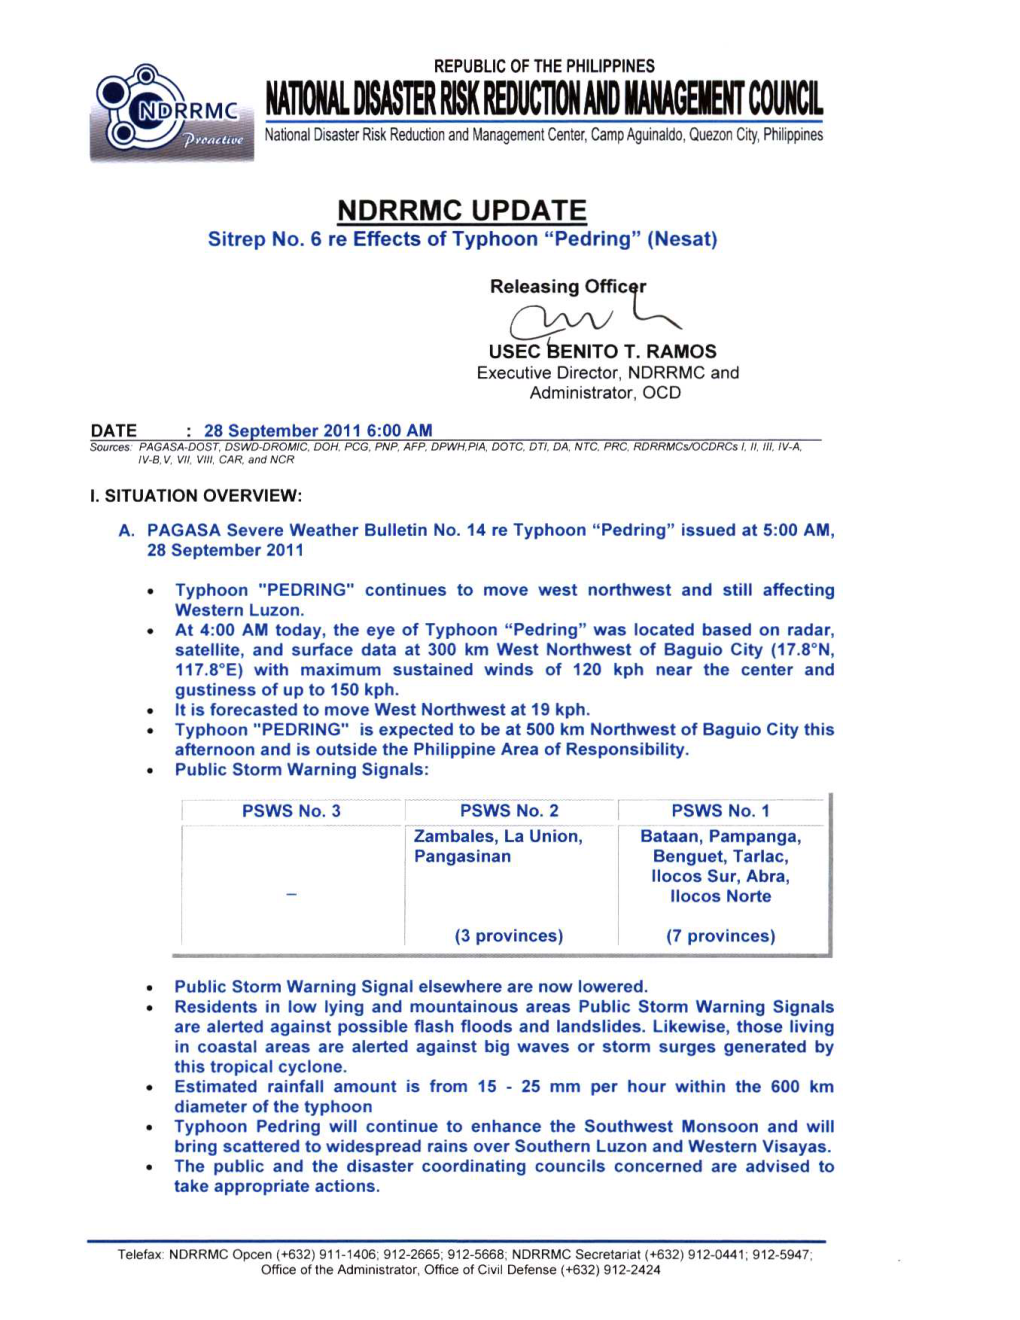 NDRRMC Update Re Sitrep No 6 Re TY PEDRING 28 Sep 2011